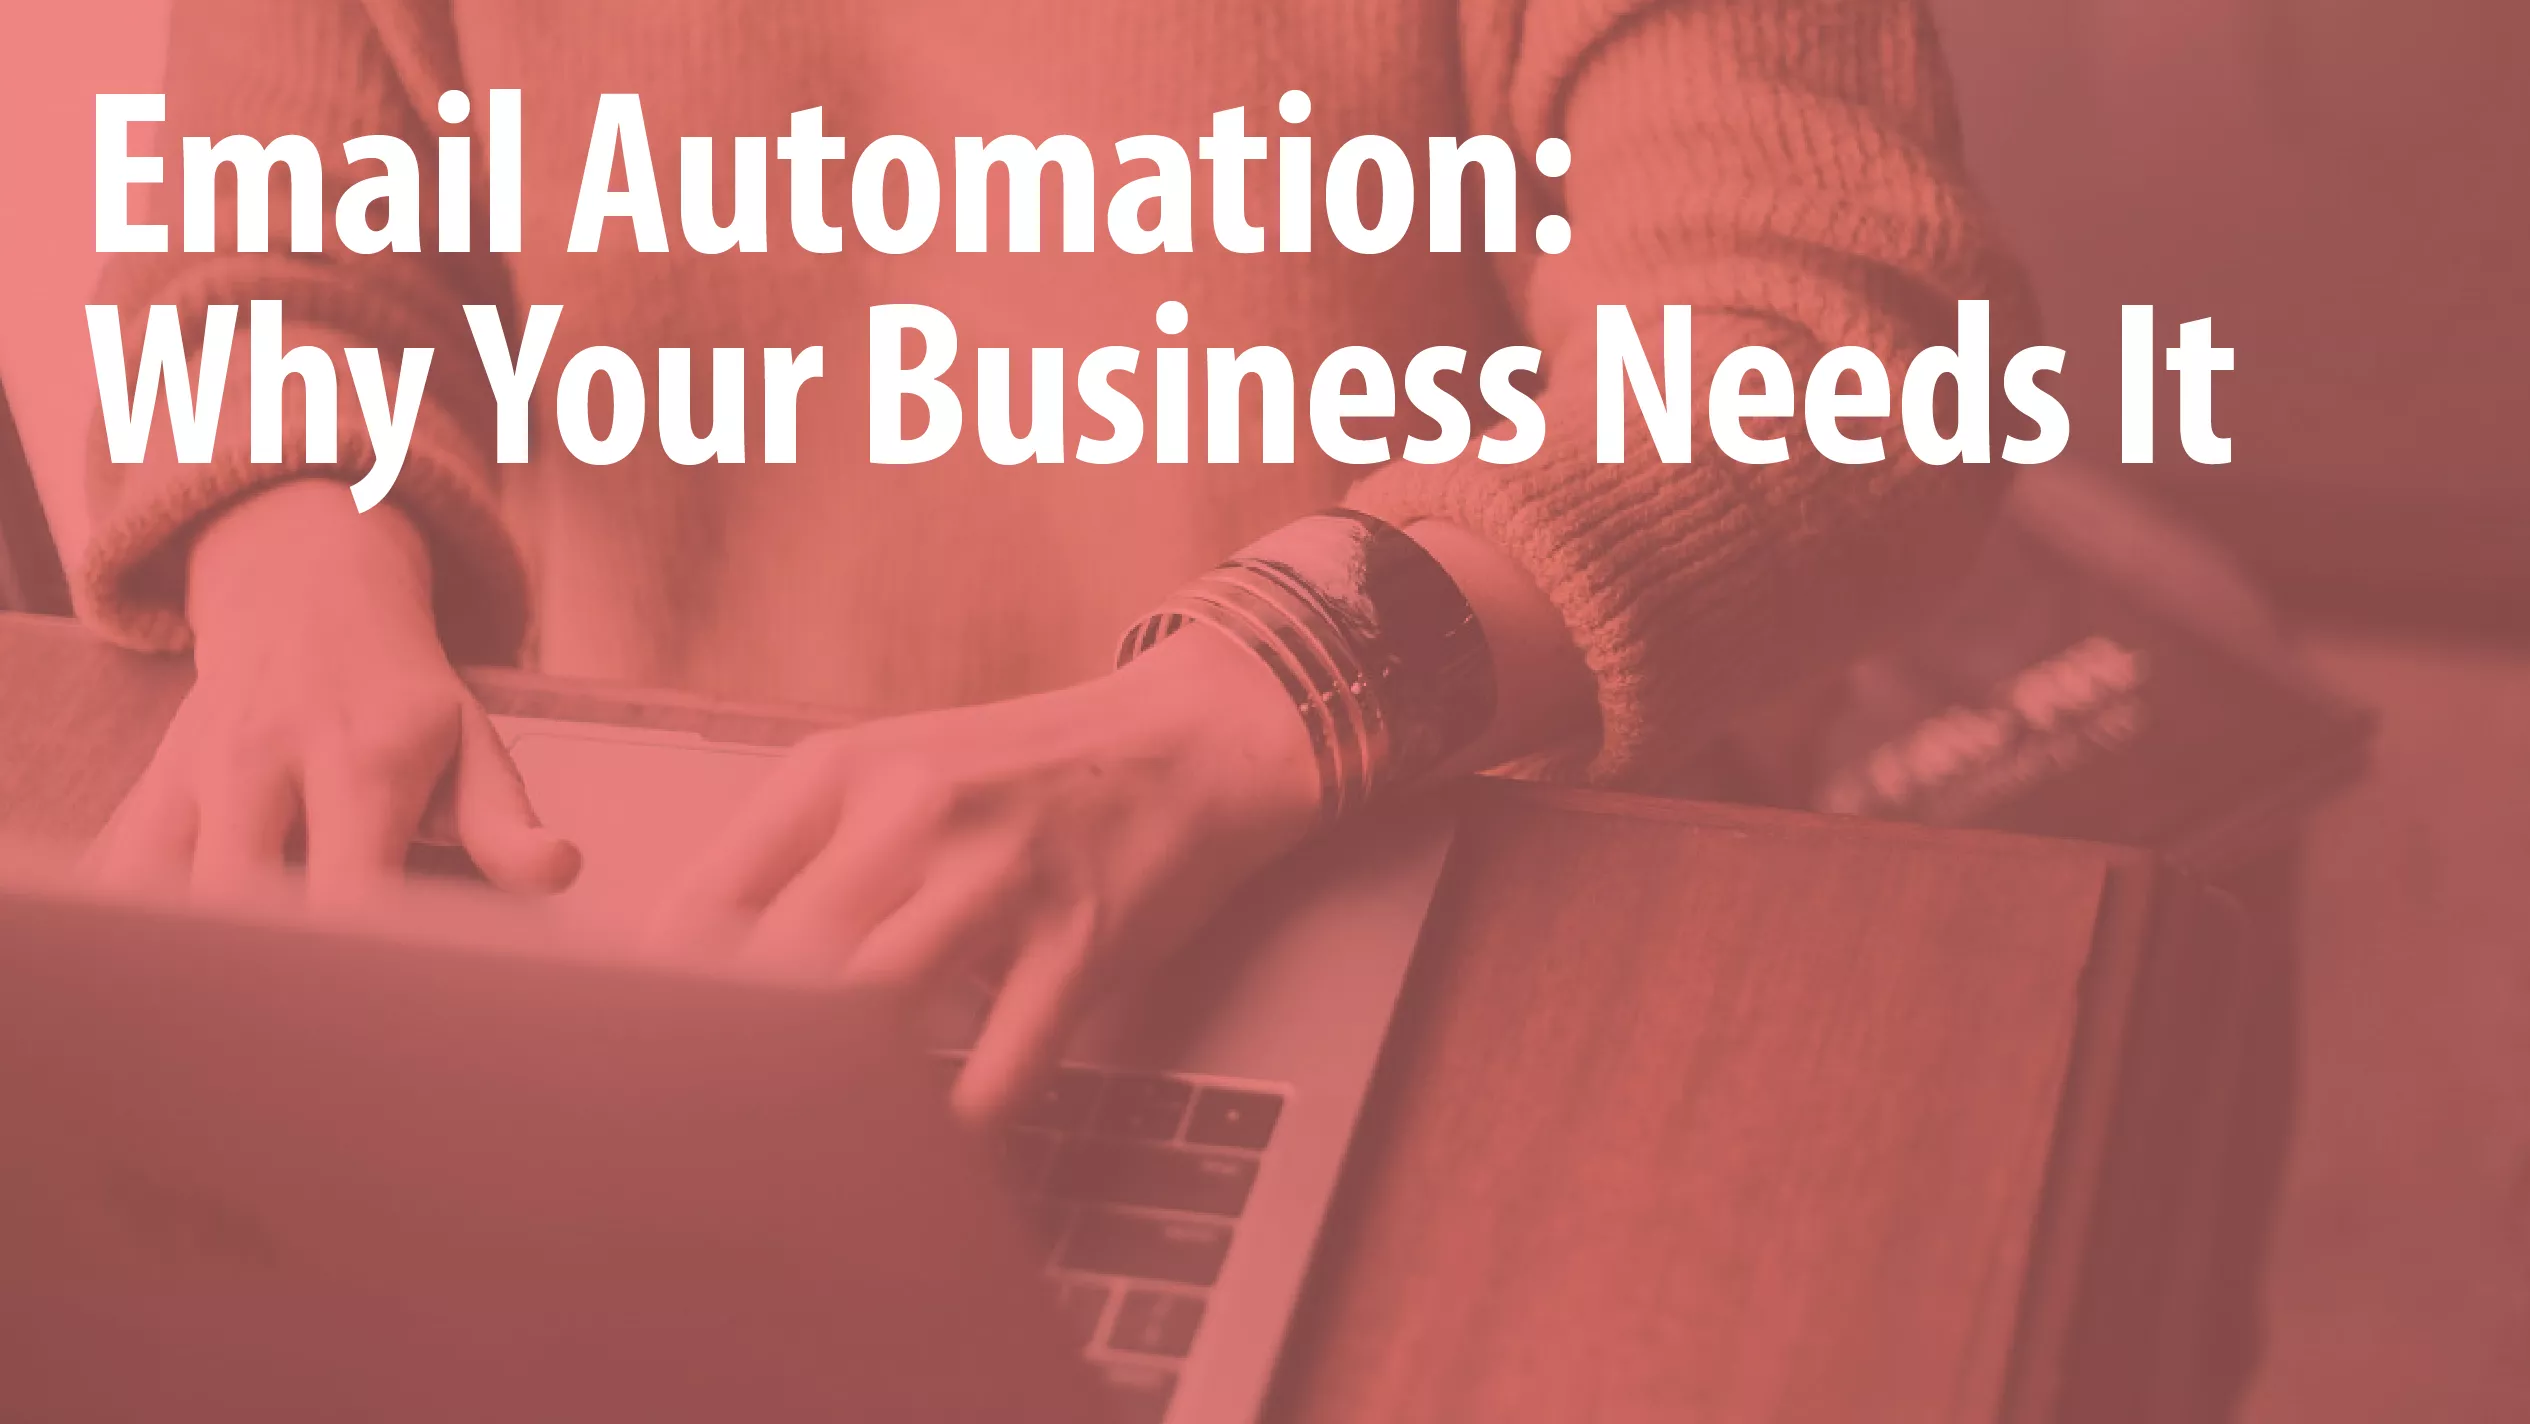 Email Automation Article Header